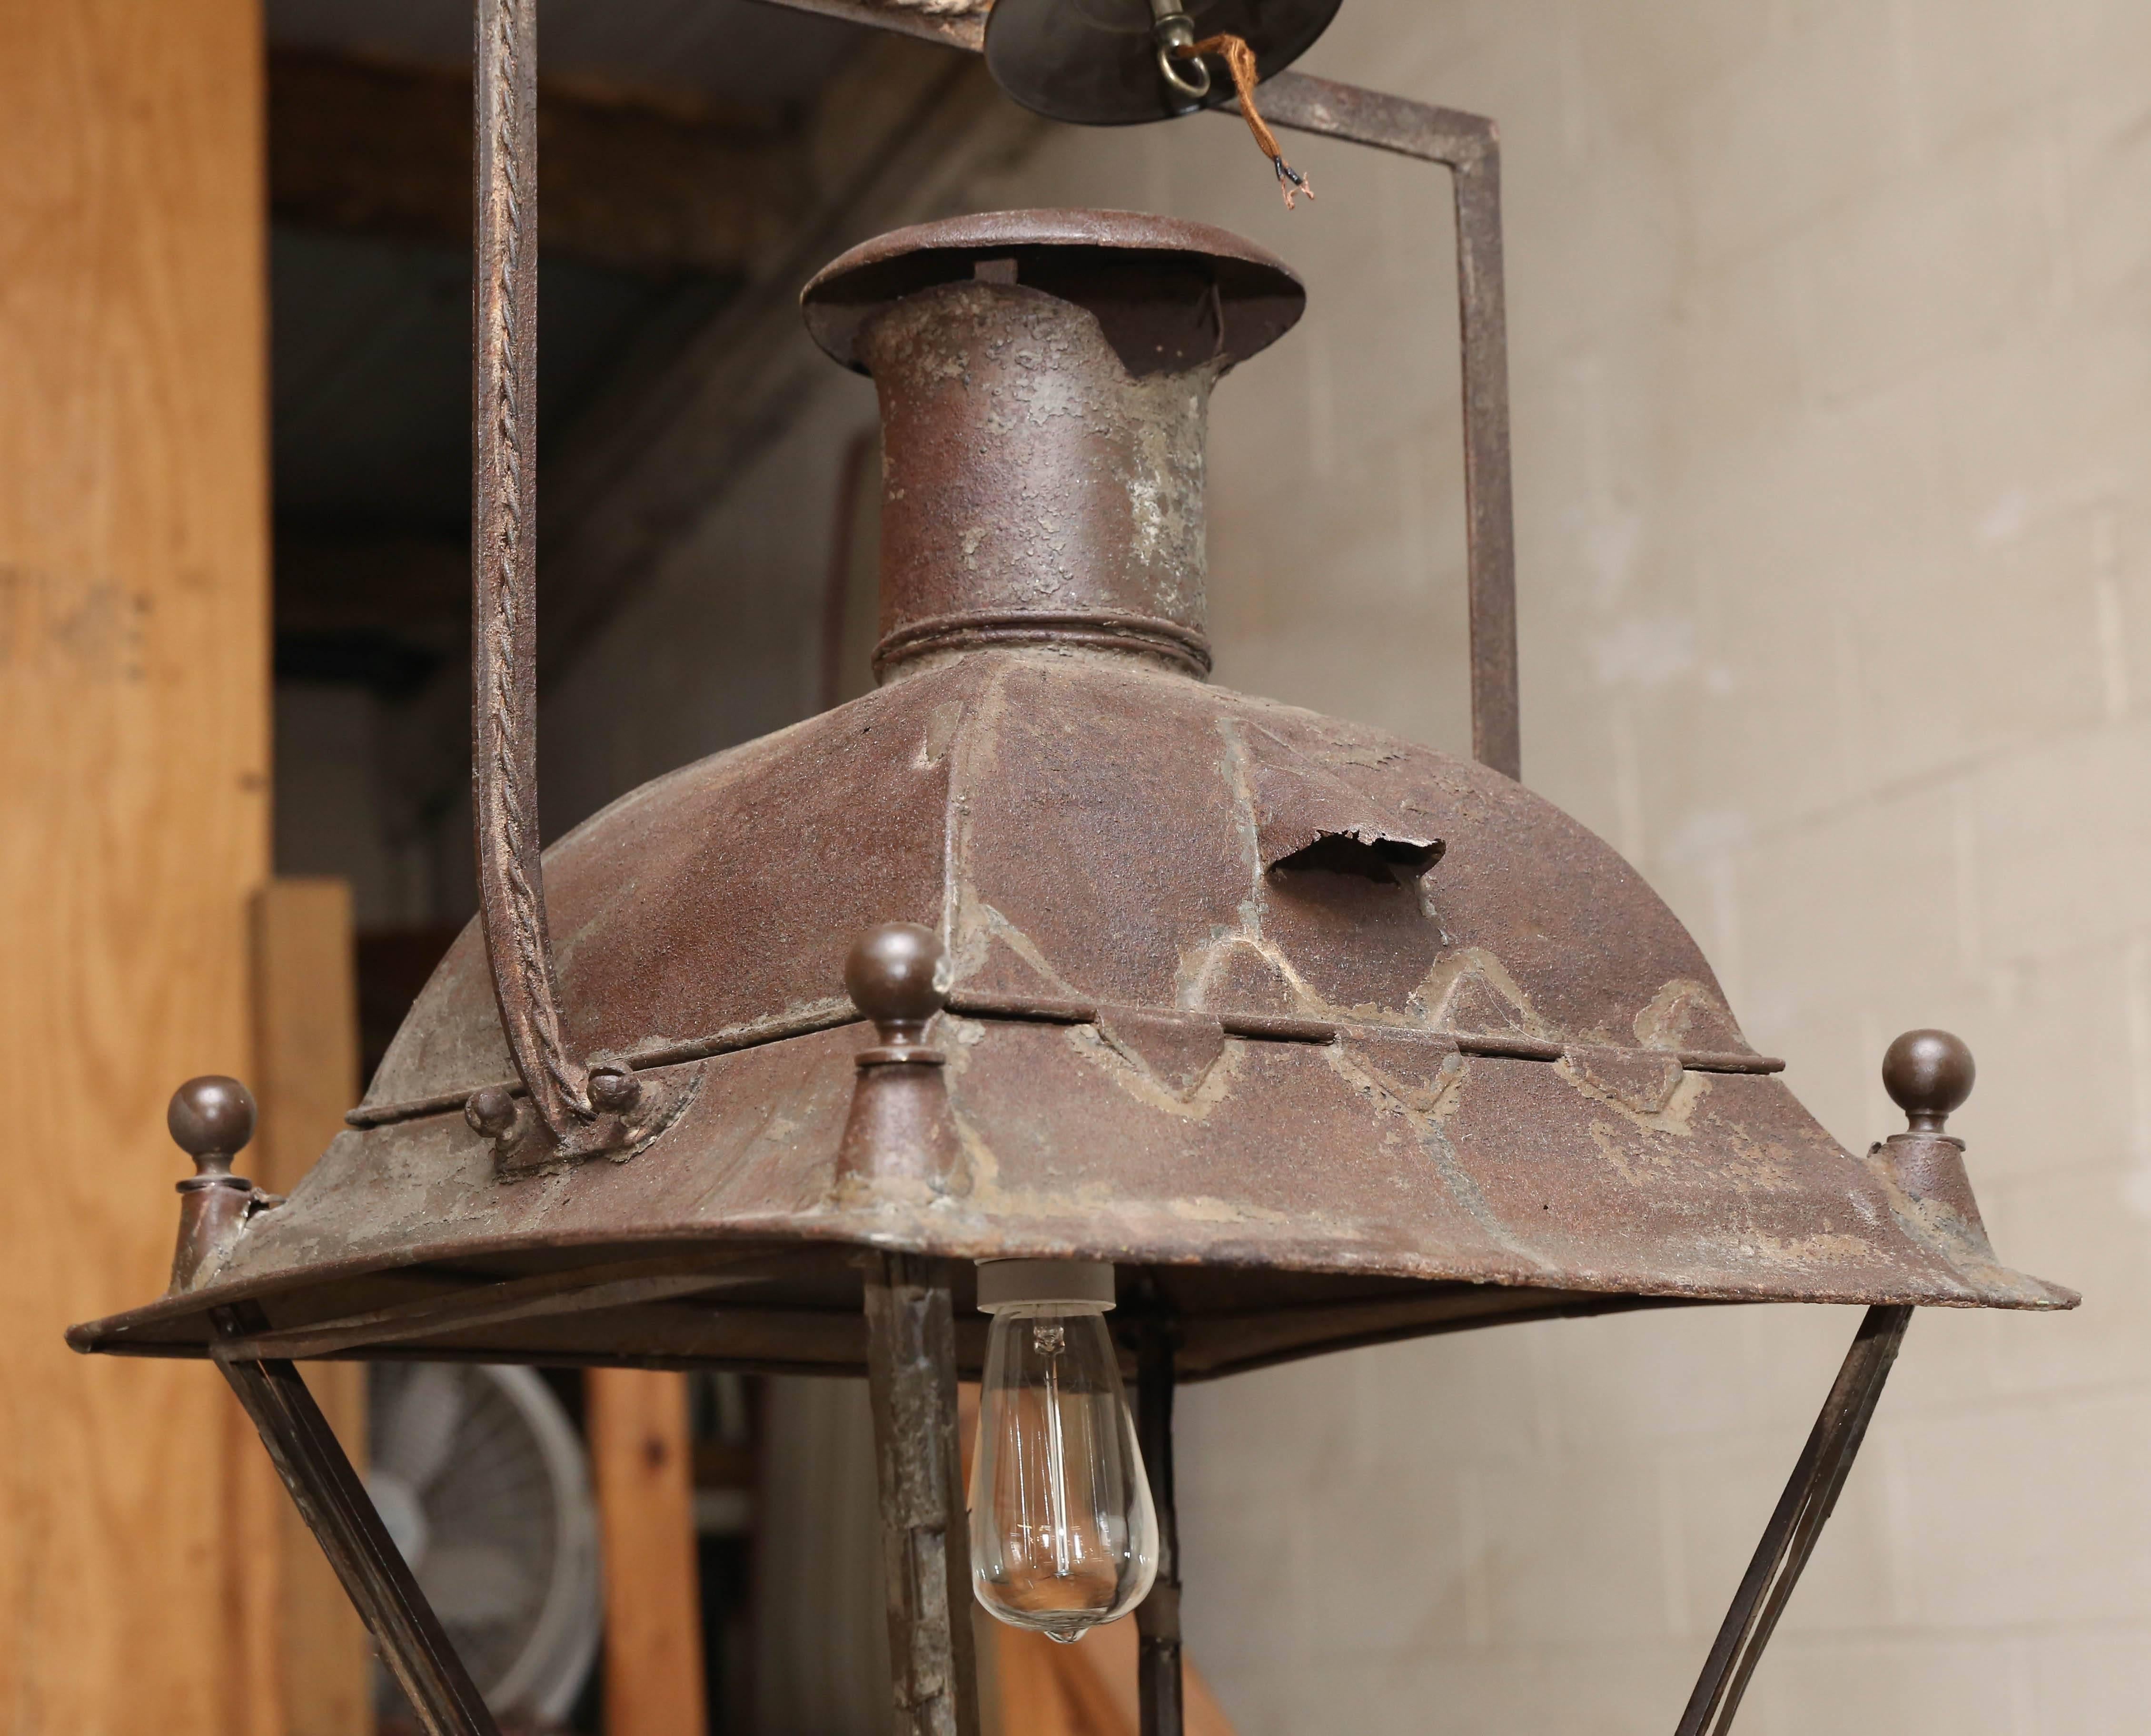 Featured here is a beautiful Italian, 18th century lantern that has been newly wired. This piece has minor loses on the top of the lantern due to age.